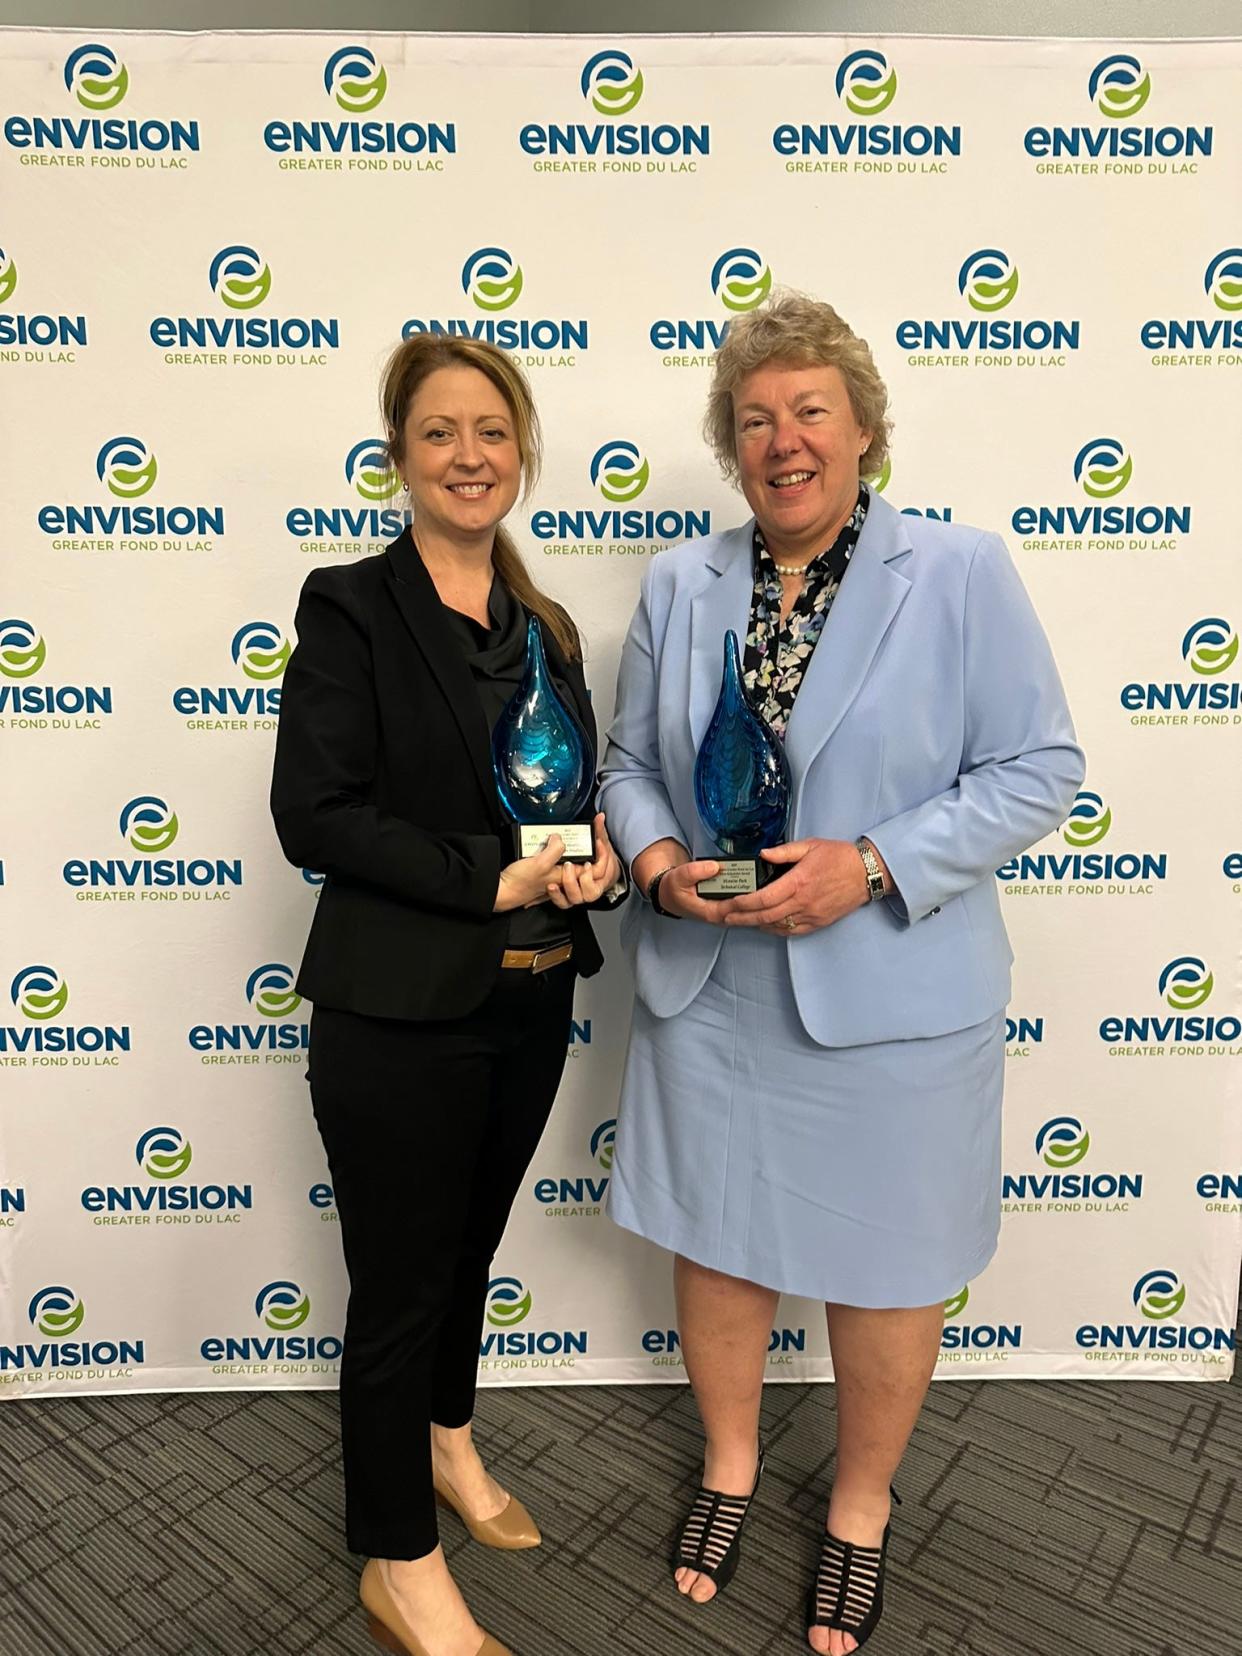 Katherine Vergos, SSM Health St. Agnes Hospital president, and Bonnie Baerwald, MPTC president, recently accepted the Eden-Schneider Award from Envision Greater Fond du Lac.